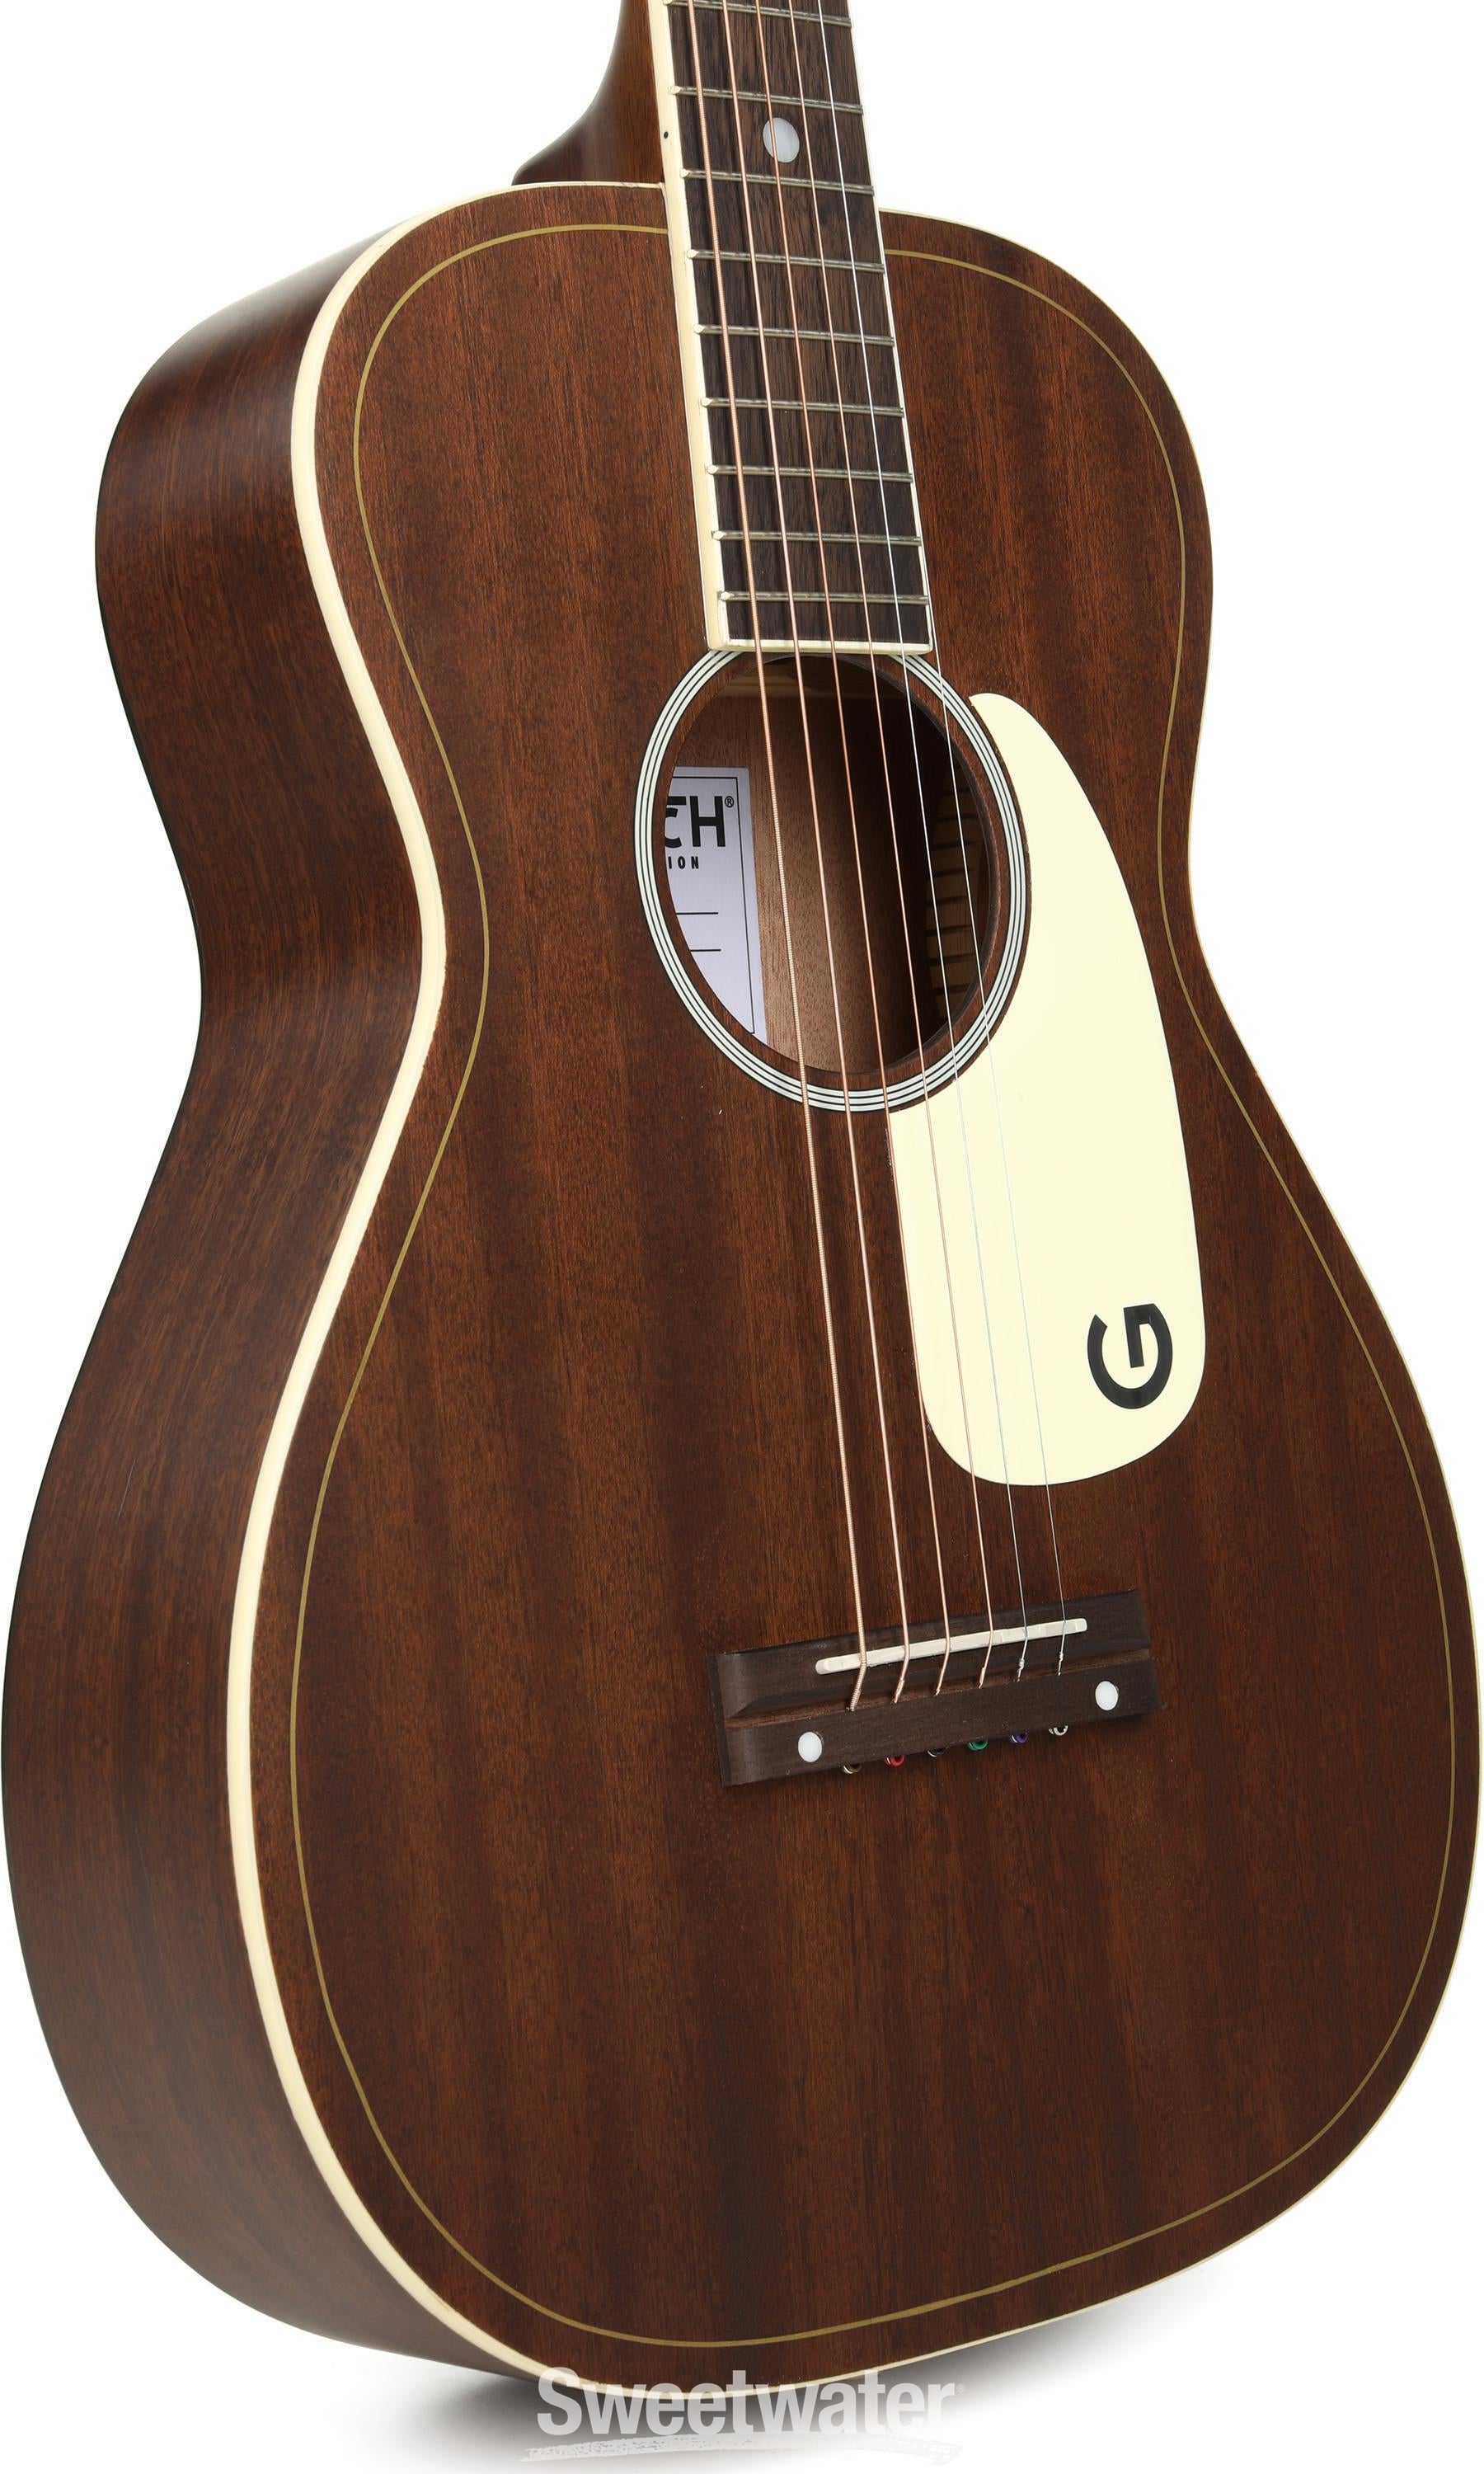 Gretsch G9500 Jim Dandy Flat Top - Frontier Stain Reviews | Sweetwater